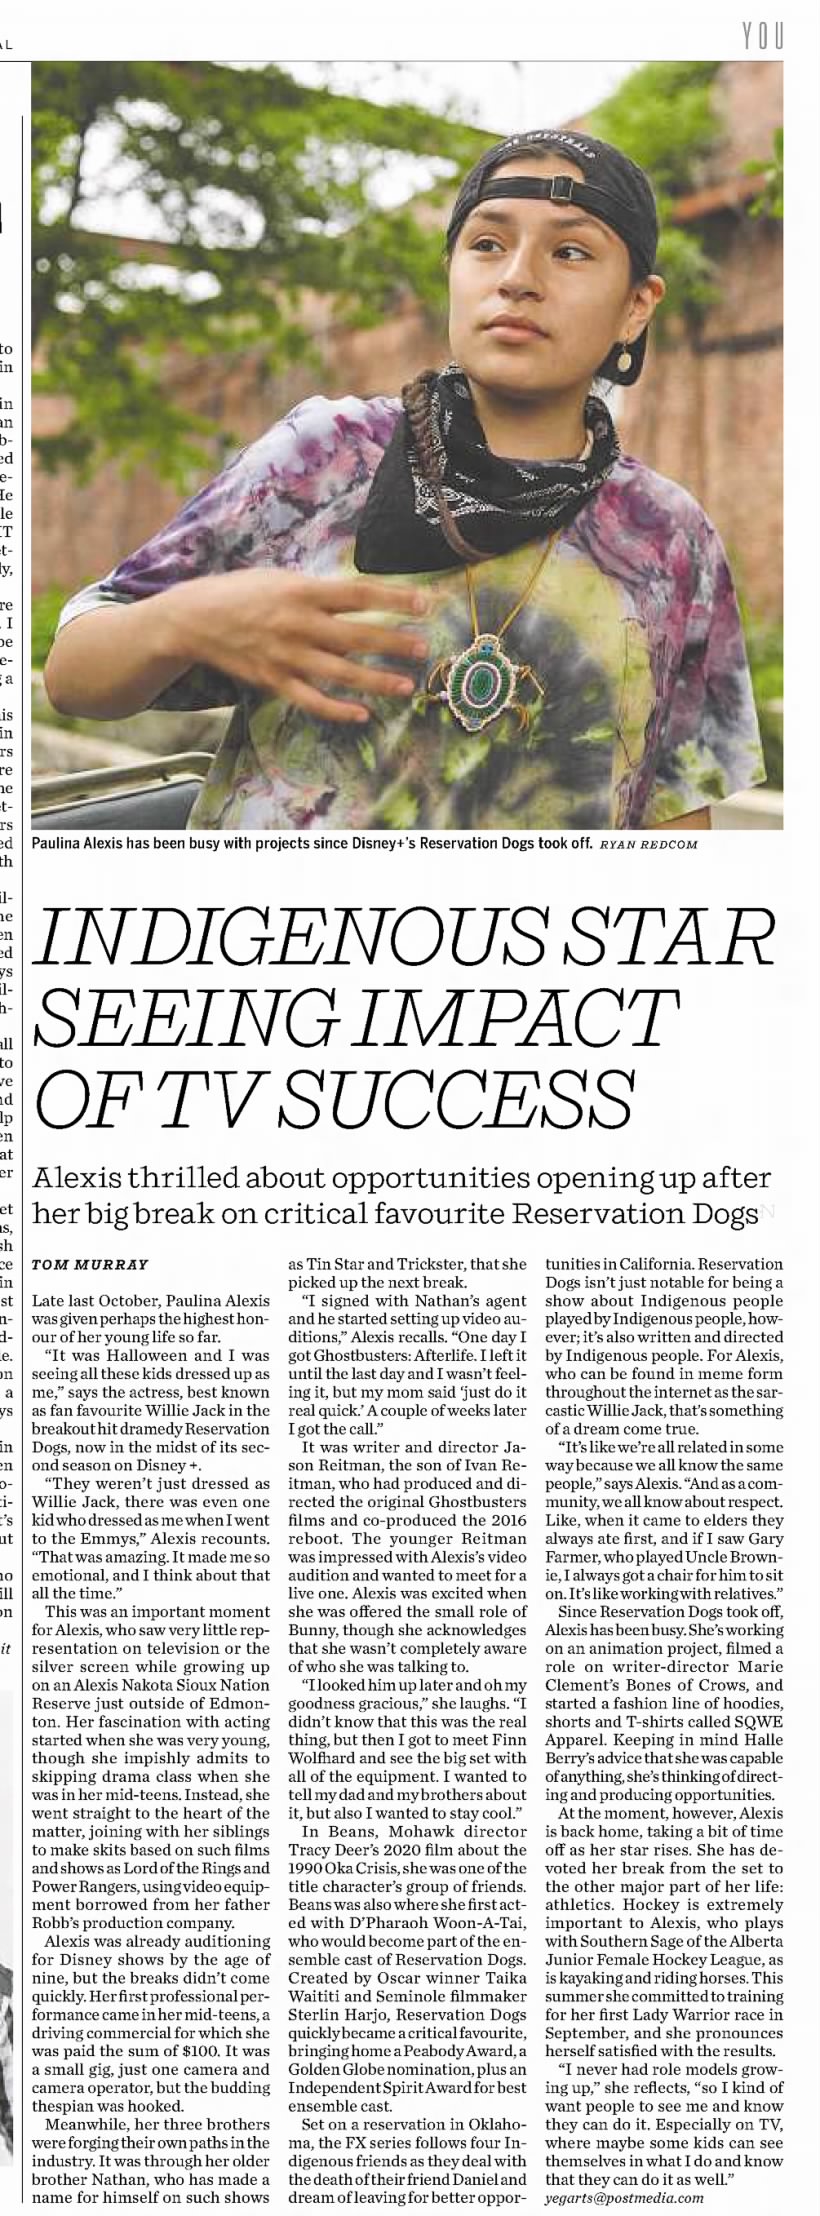 Indigenous star seeing impact of TV success